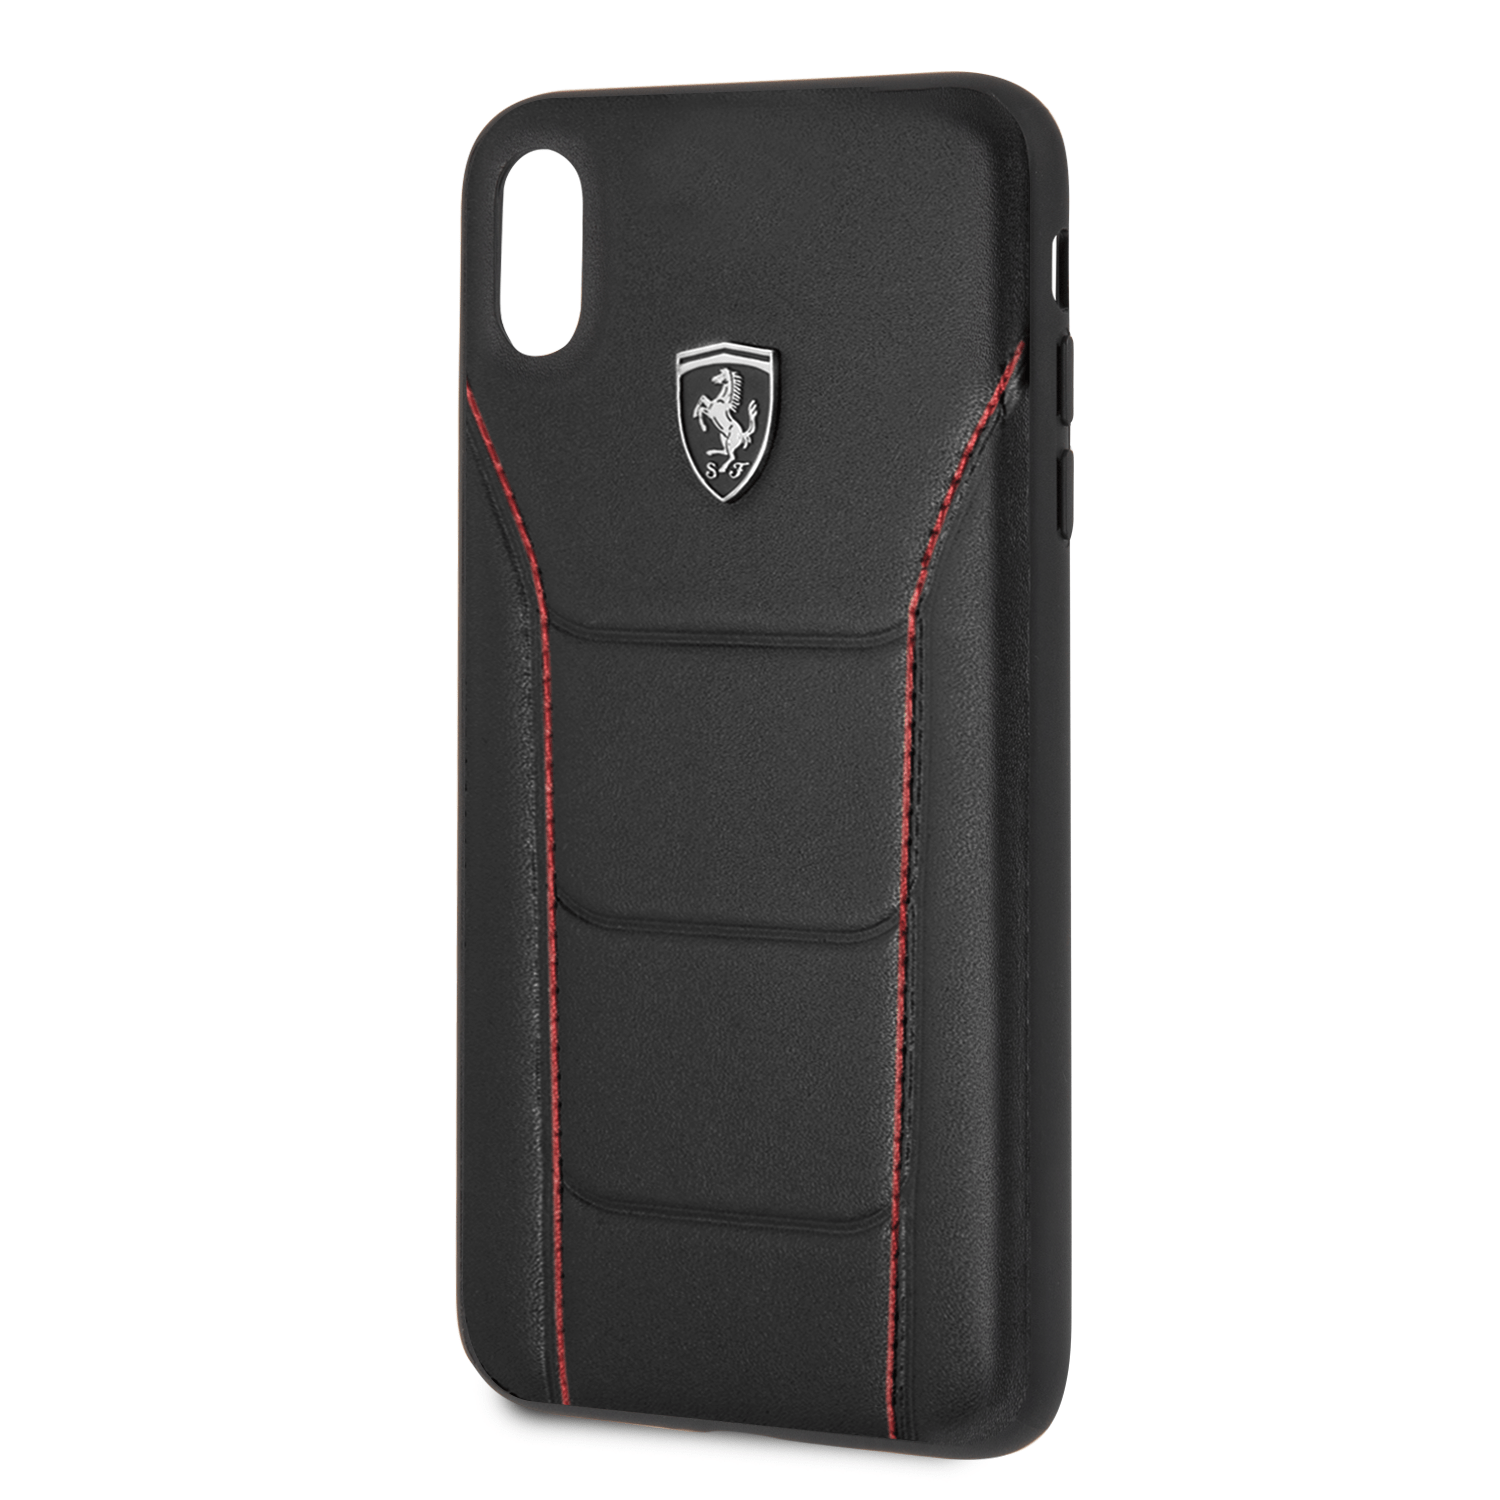 Created to assure protection to your smartphone while adding a sophisticated style with the use of mix material and contrast colors